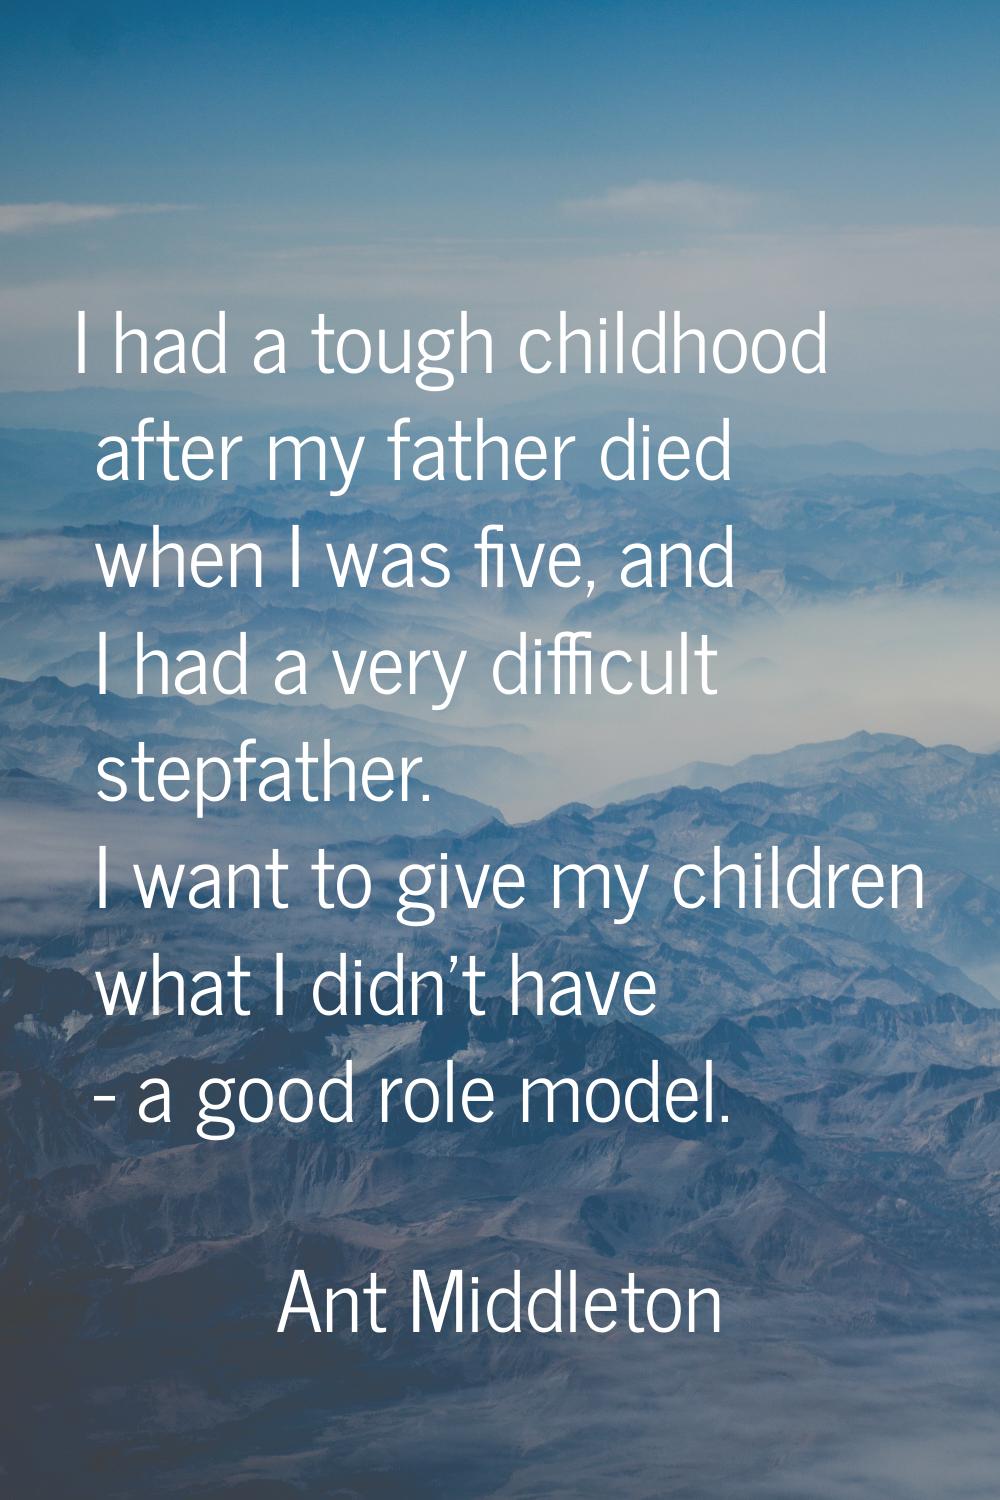 I had a tough childhood after my father died when I was five, and I had a very difficult stepfather